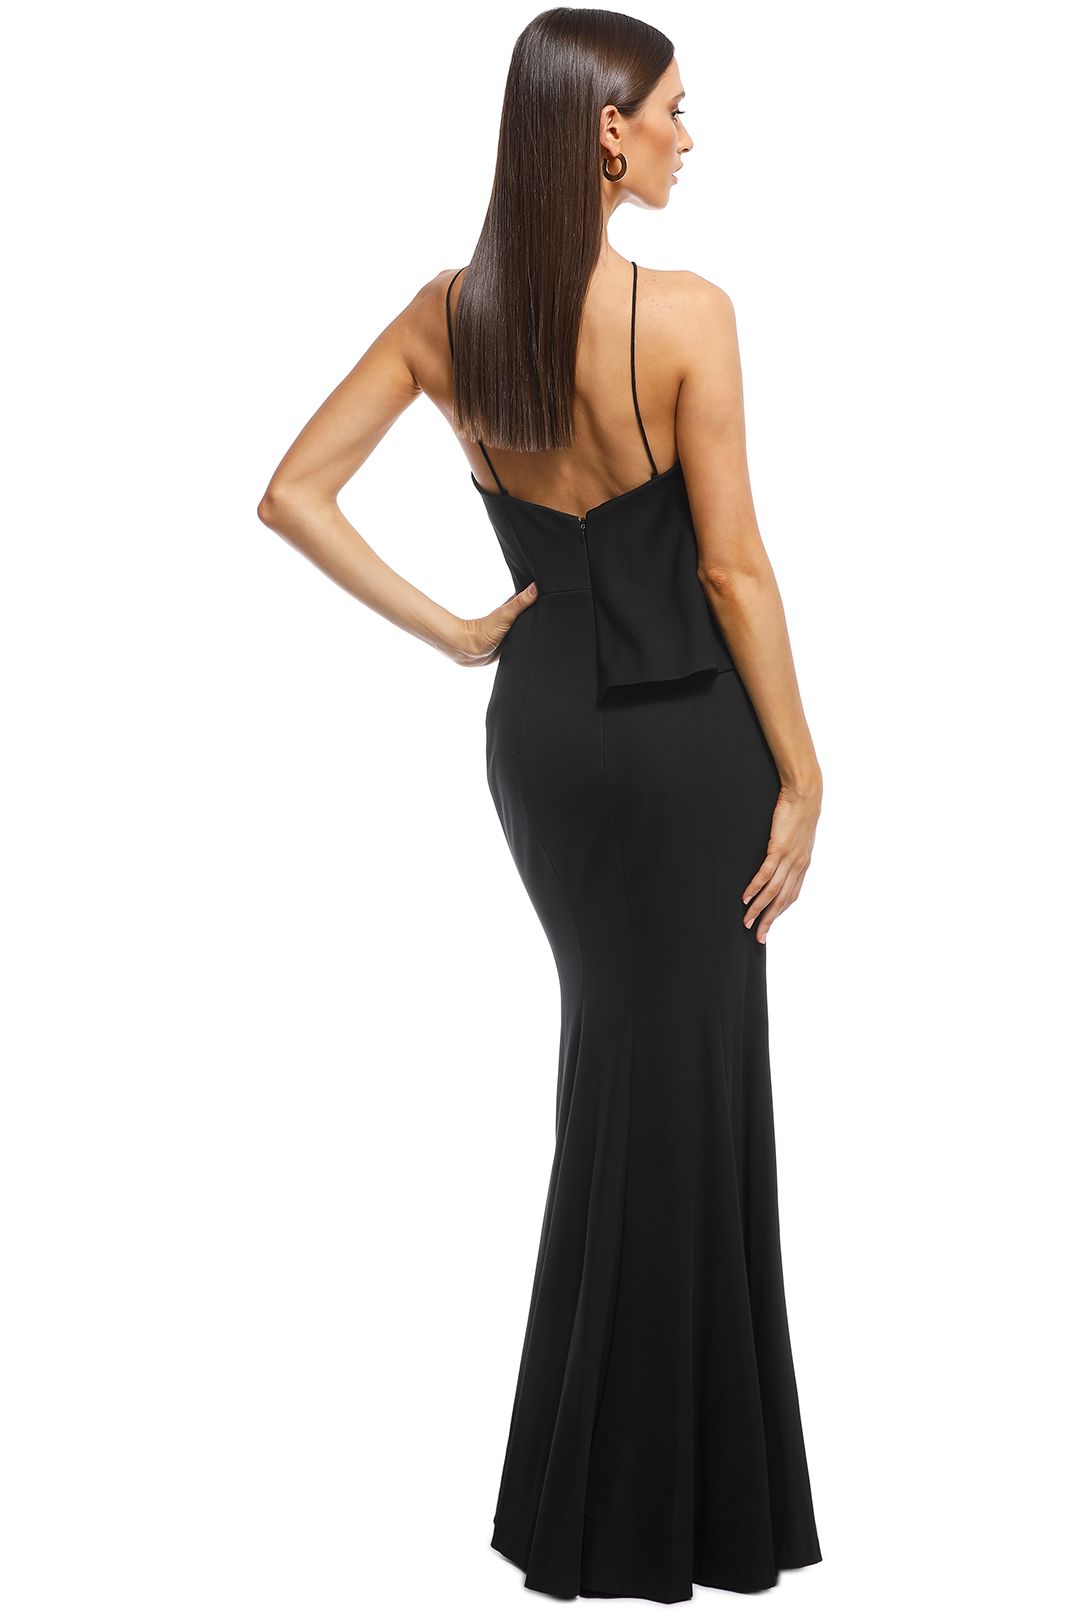 Talulah - After The Storm Gown - Black - Back